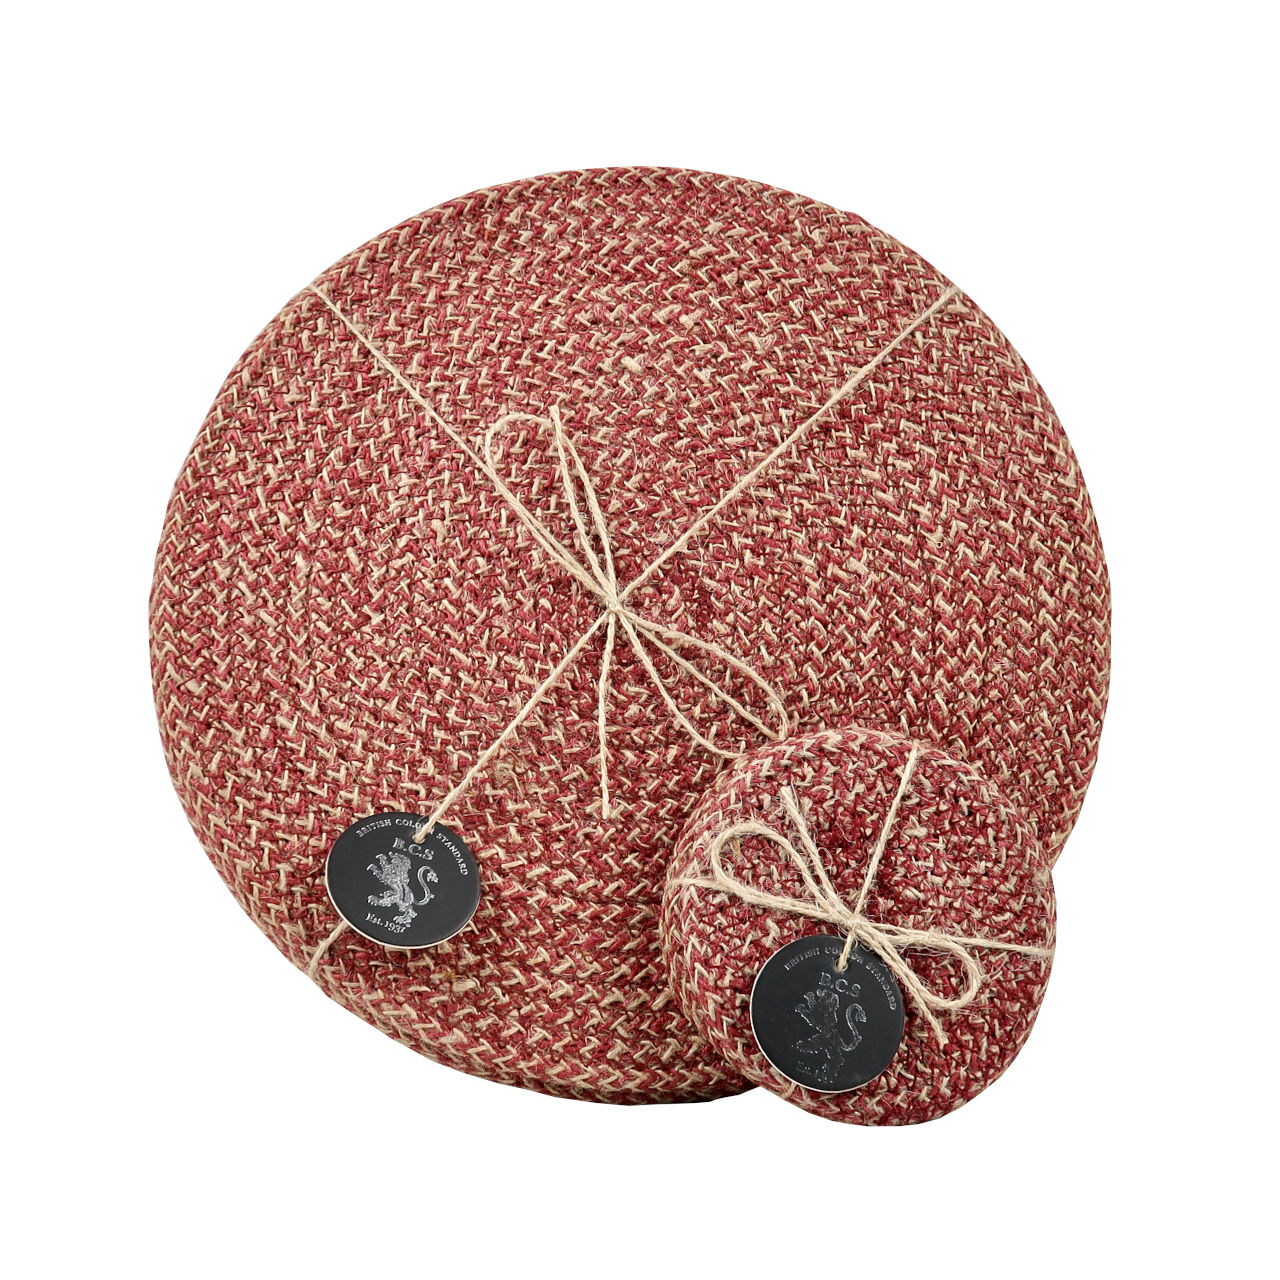 British Colour Standard Set of 4 Guardsman Red Woven Jute Coasters and Place Mats